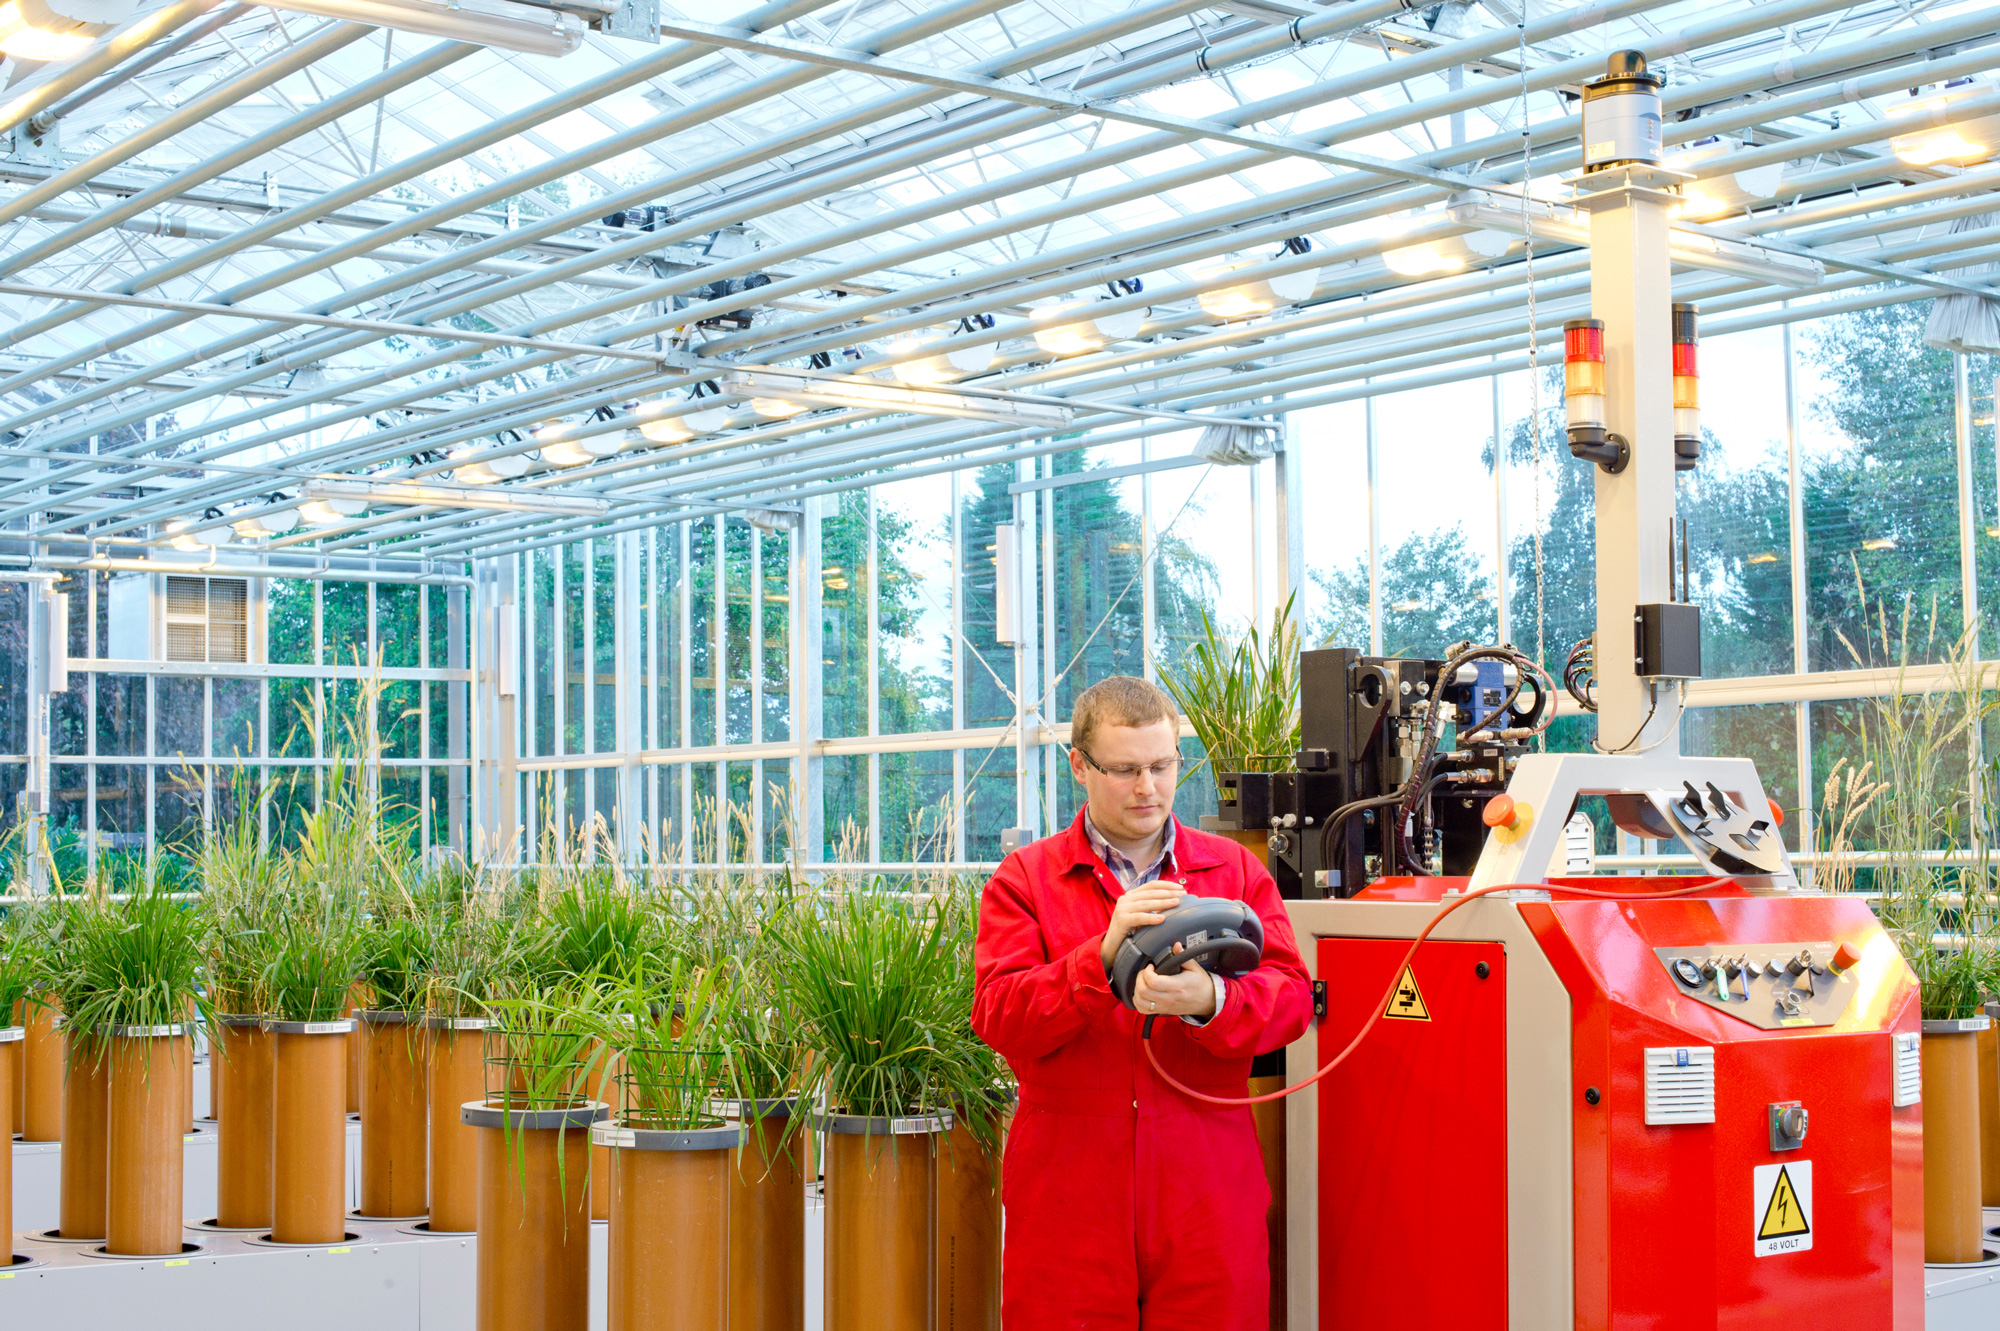 A student working on machinery in a greenhouse 